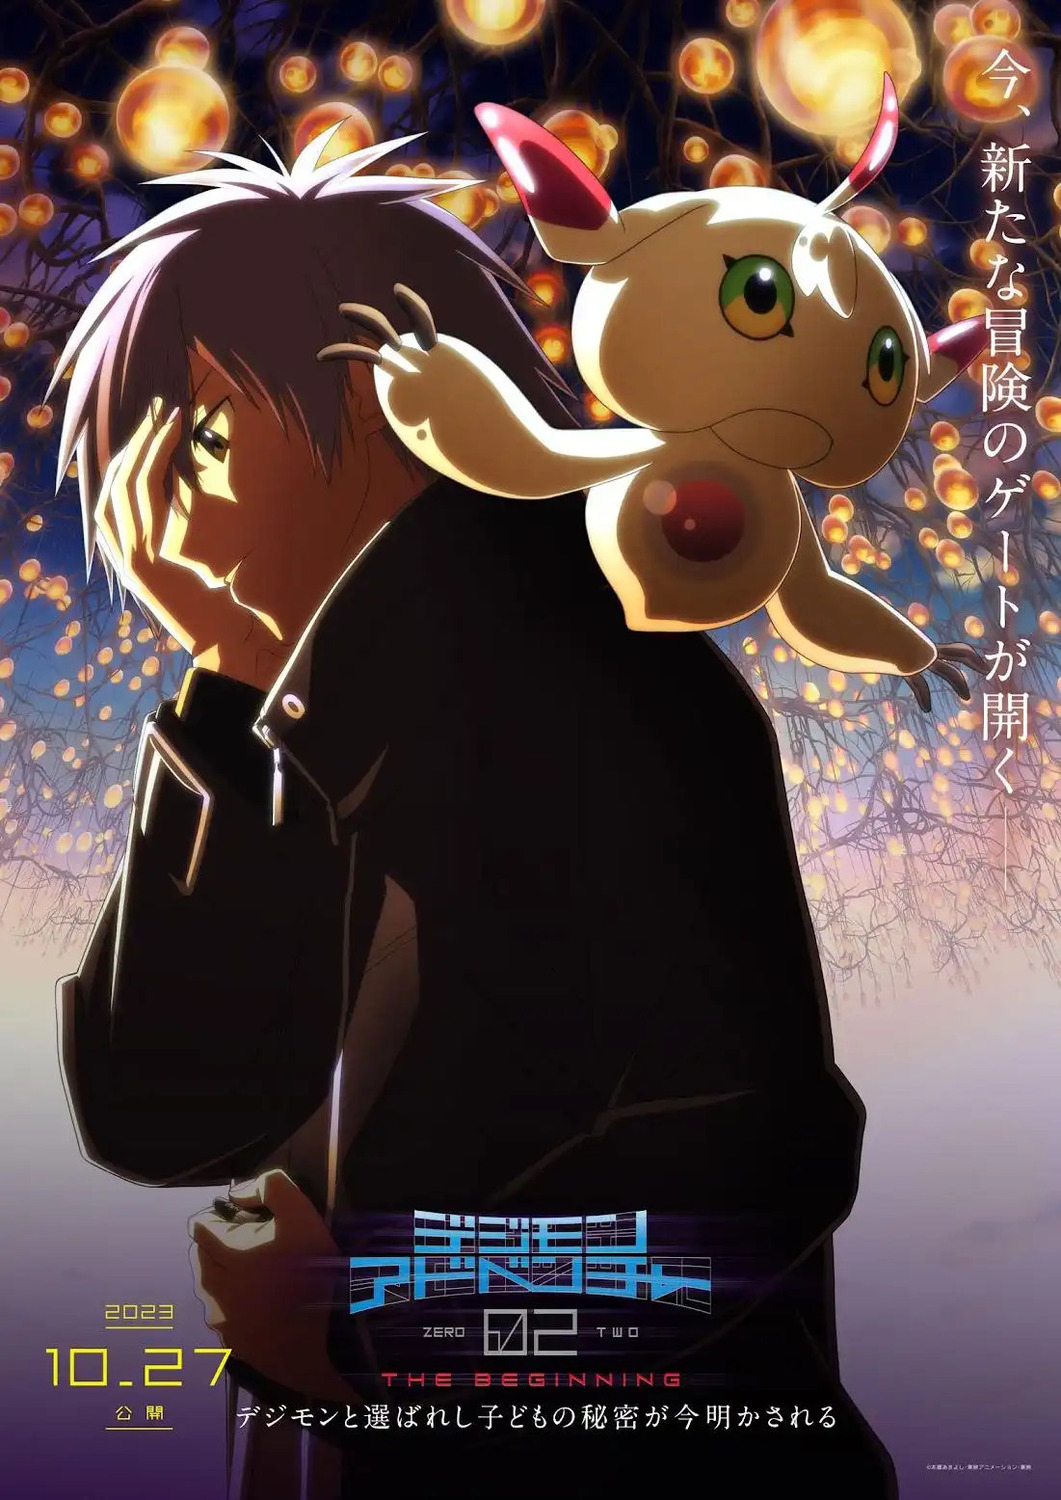 Extra Large Movie Poster Image for Digimon Adventure 02: The Beginning (#6 of 6)